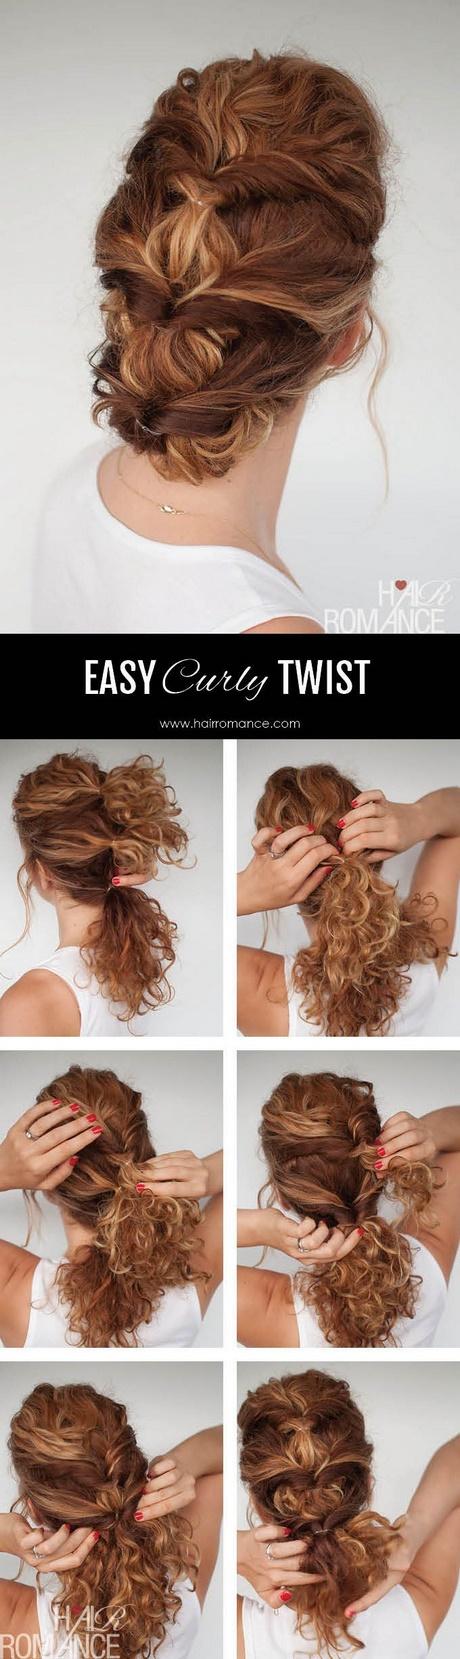 Simple daily hairstyles for curly hair simple-daily-hairstyles-for-curly-hair-03_15